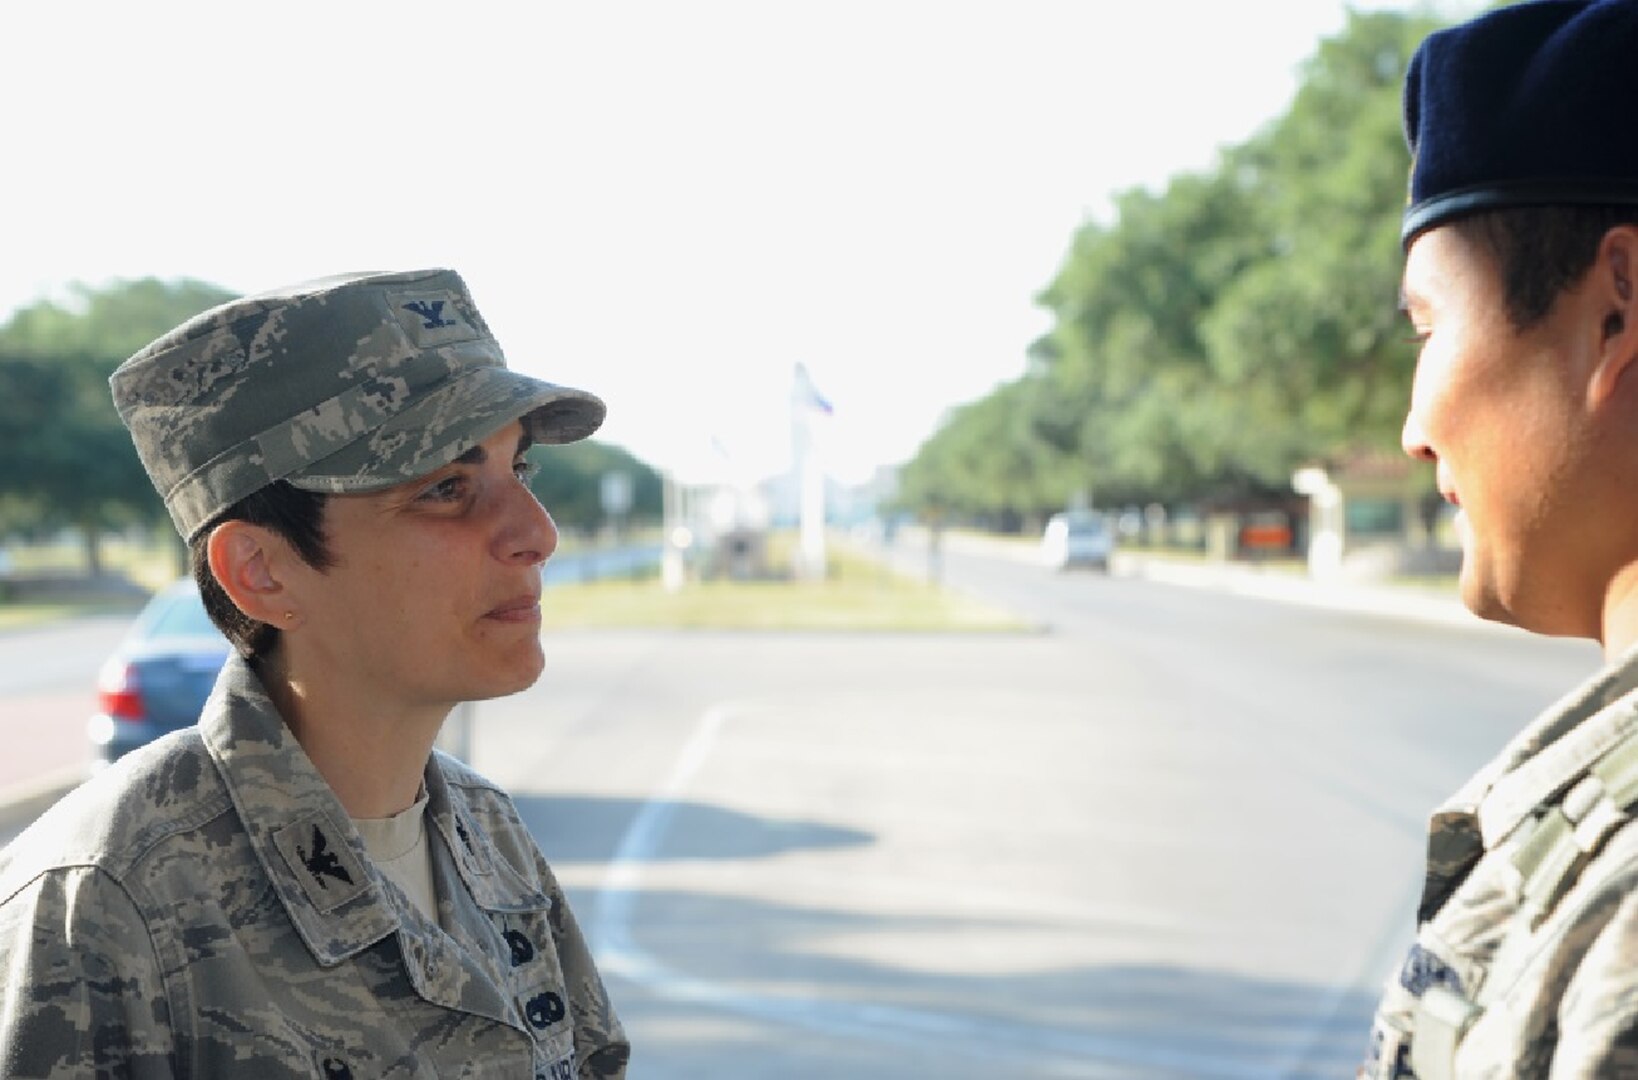 Col. Christine Erlewine (left), 502nd Security Forces and Logistics Support Group commander, speaks with Senior Airman Shasa Honse, 902nd Security Forces Squadron entry controller, Aug. 12 at the Joint Base San Antonio-Randolph Main Gate. (U.S. Air Force photo by Airman 1st Class Stormy Archer)
